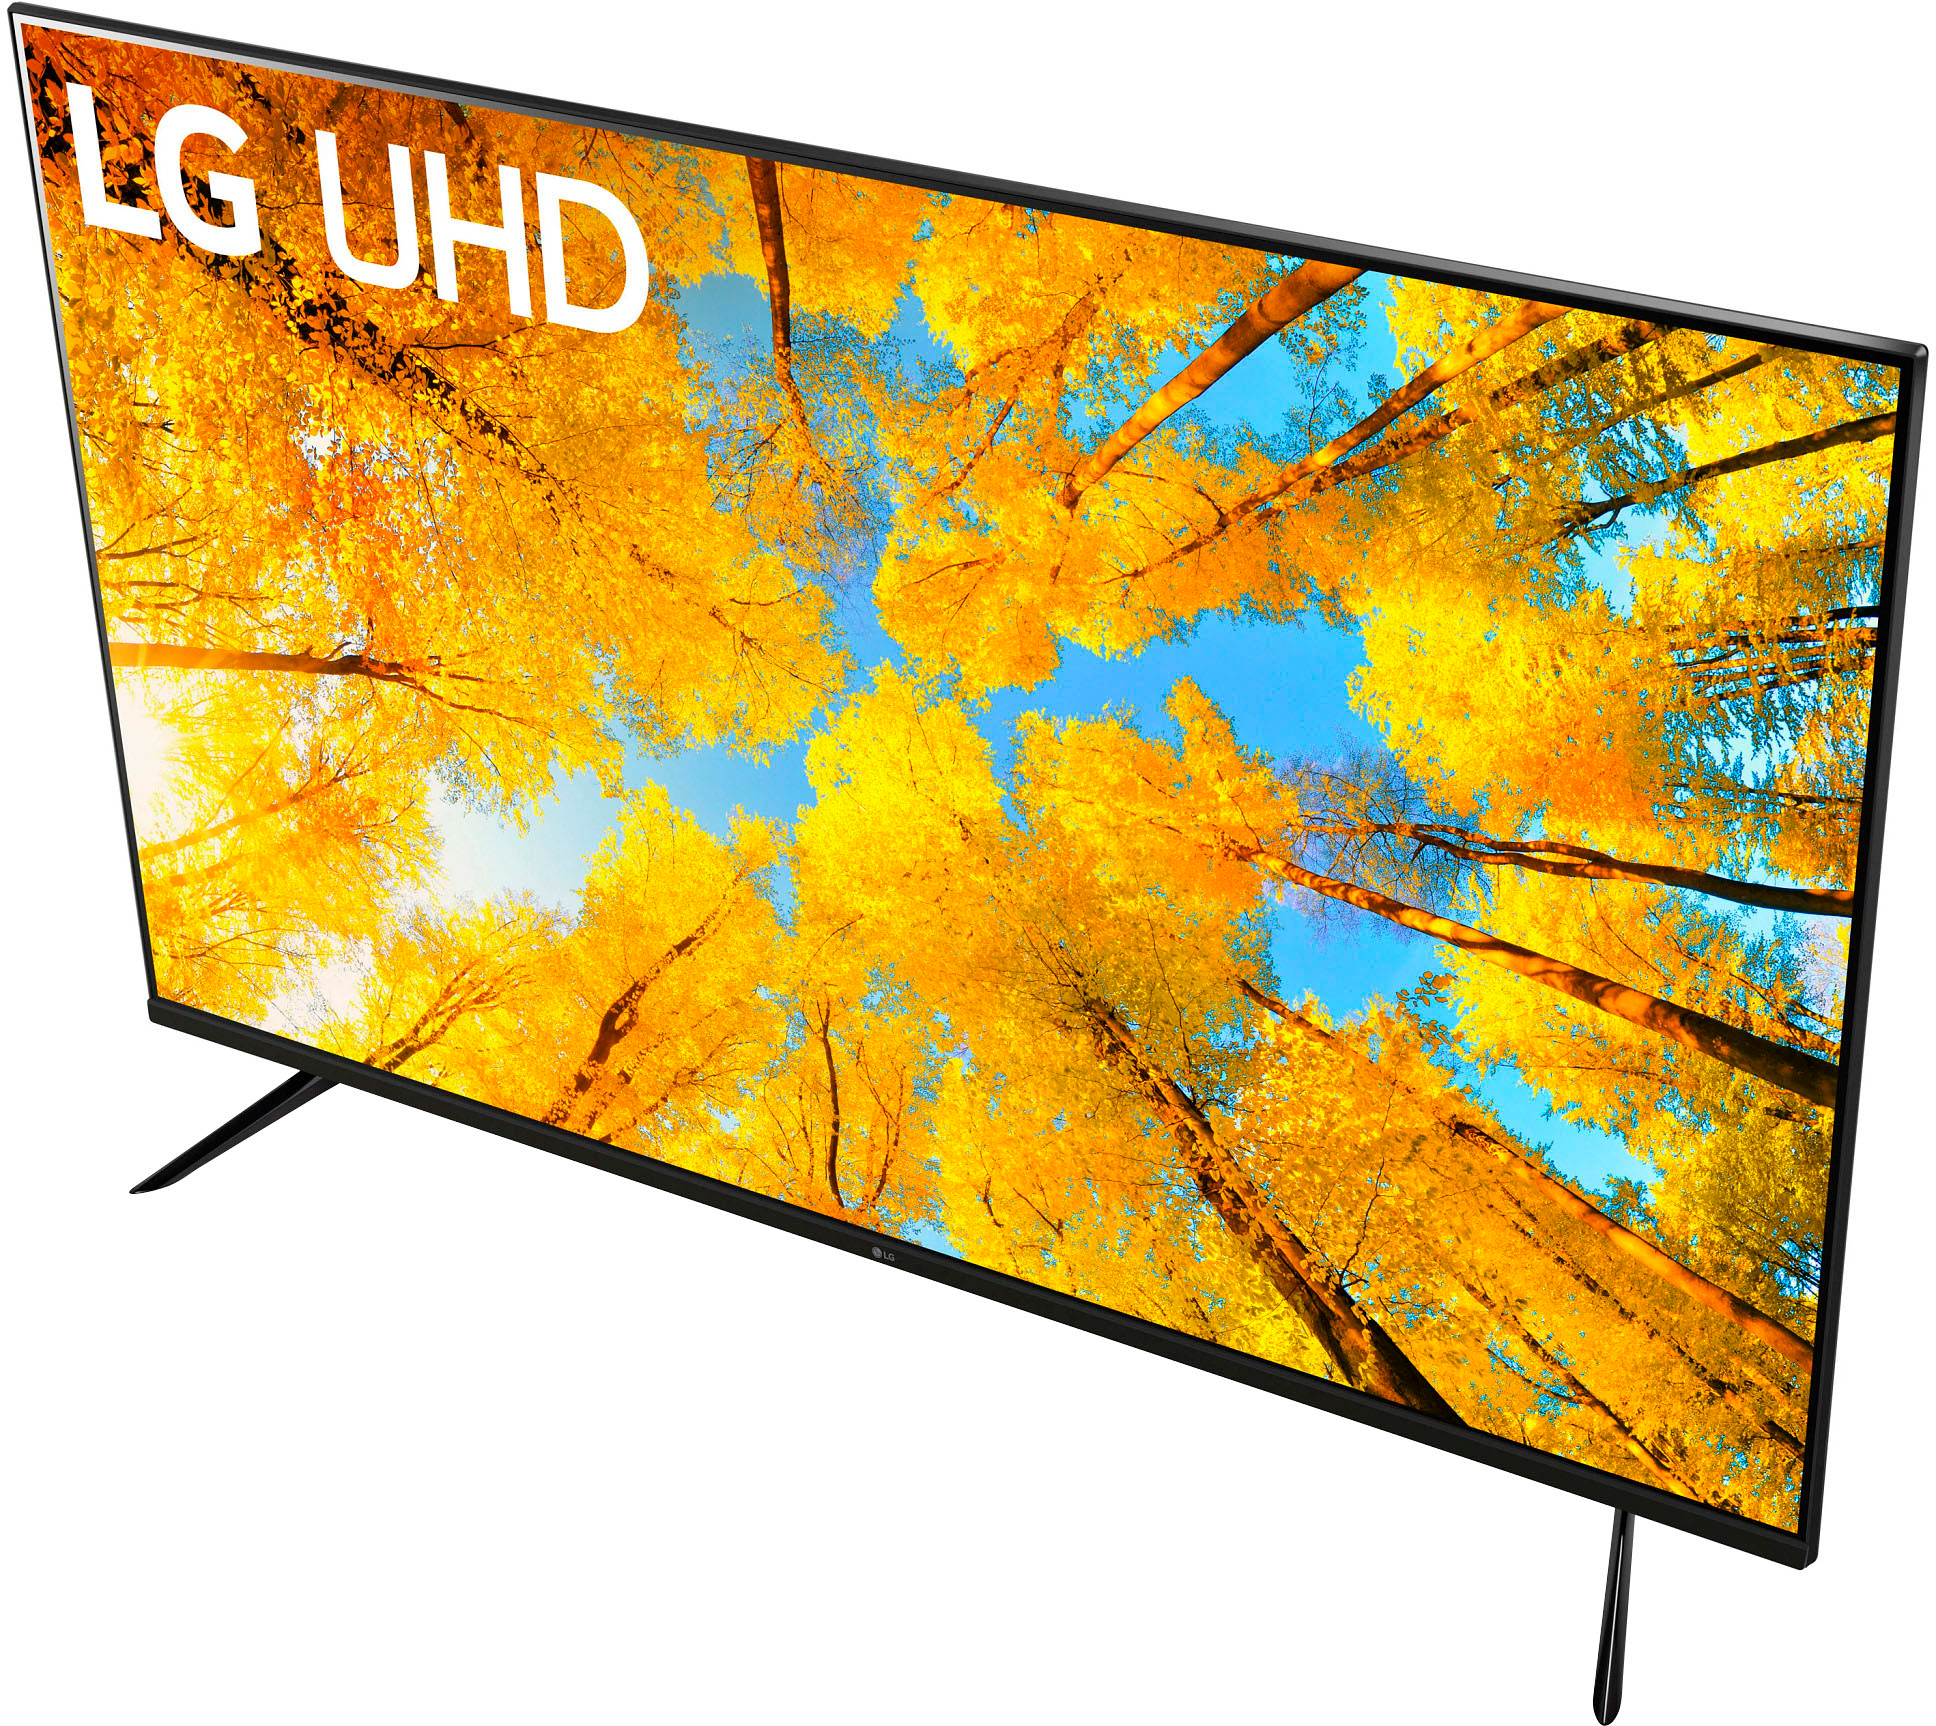  LG NanoCell 75 Series 50” Alexa Built-in 4k Smart TV (3840 x  2160), 60Hz Refresh Rate, AI-Powered Ultra HD, Active HDR, HDR10, HLG  (50NANO75UPA, 2021) : Everything Else